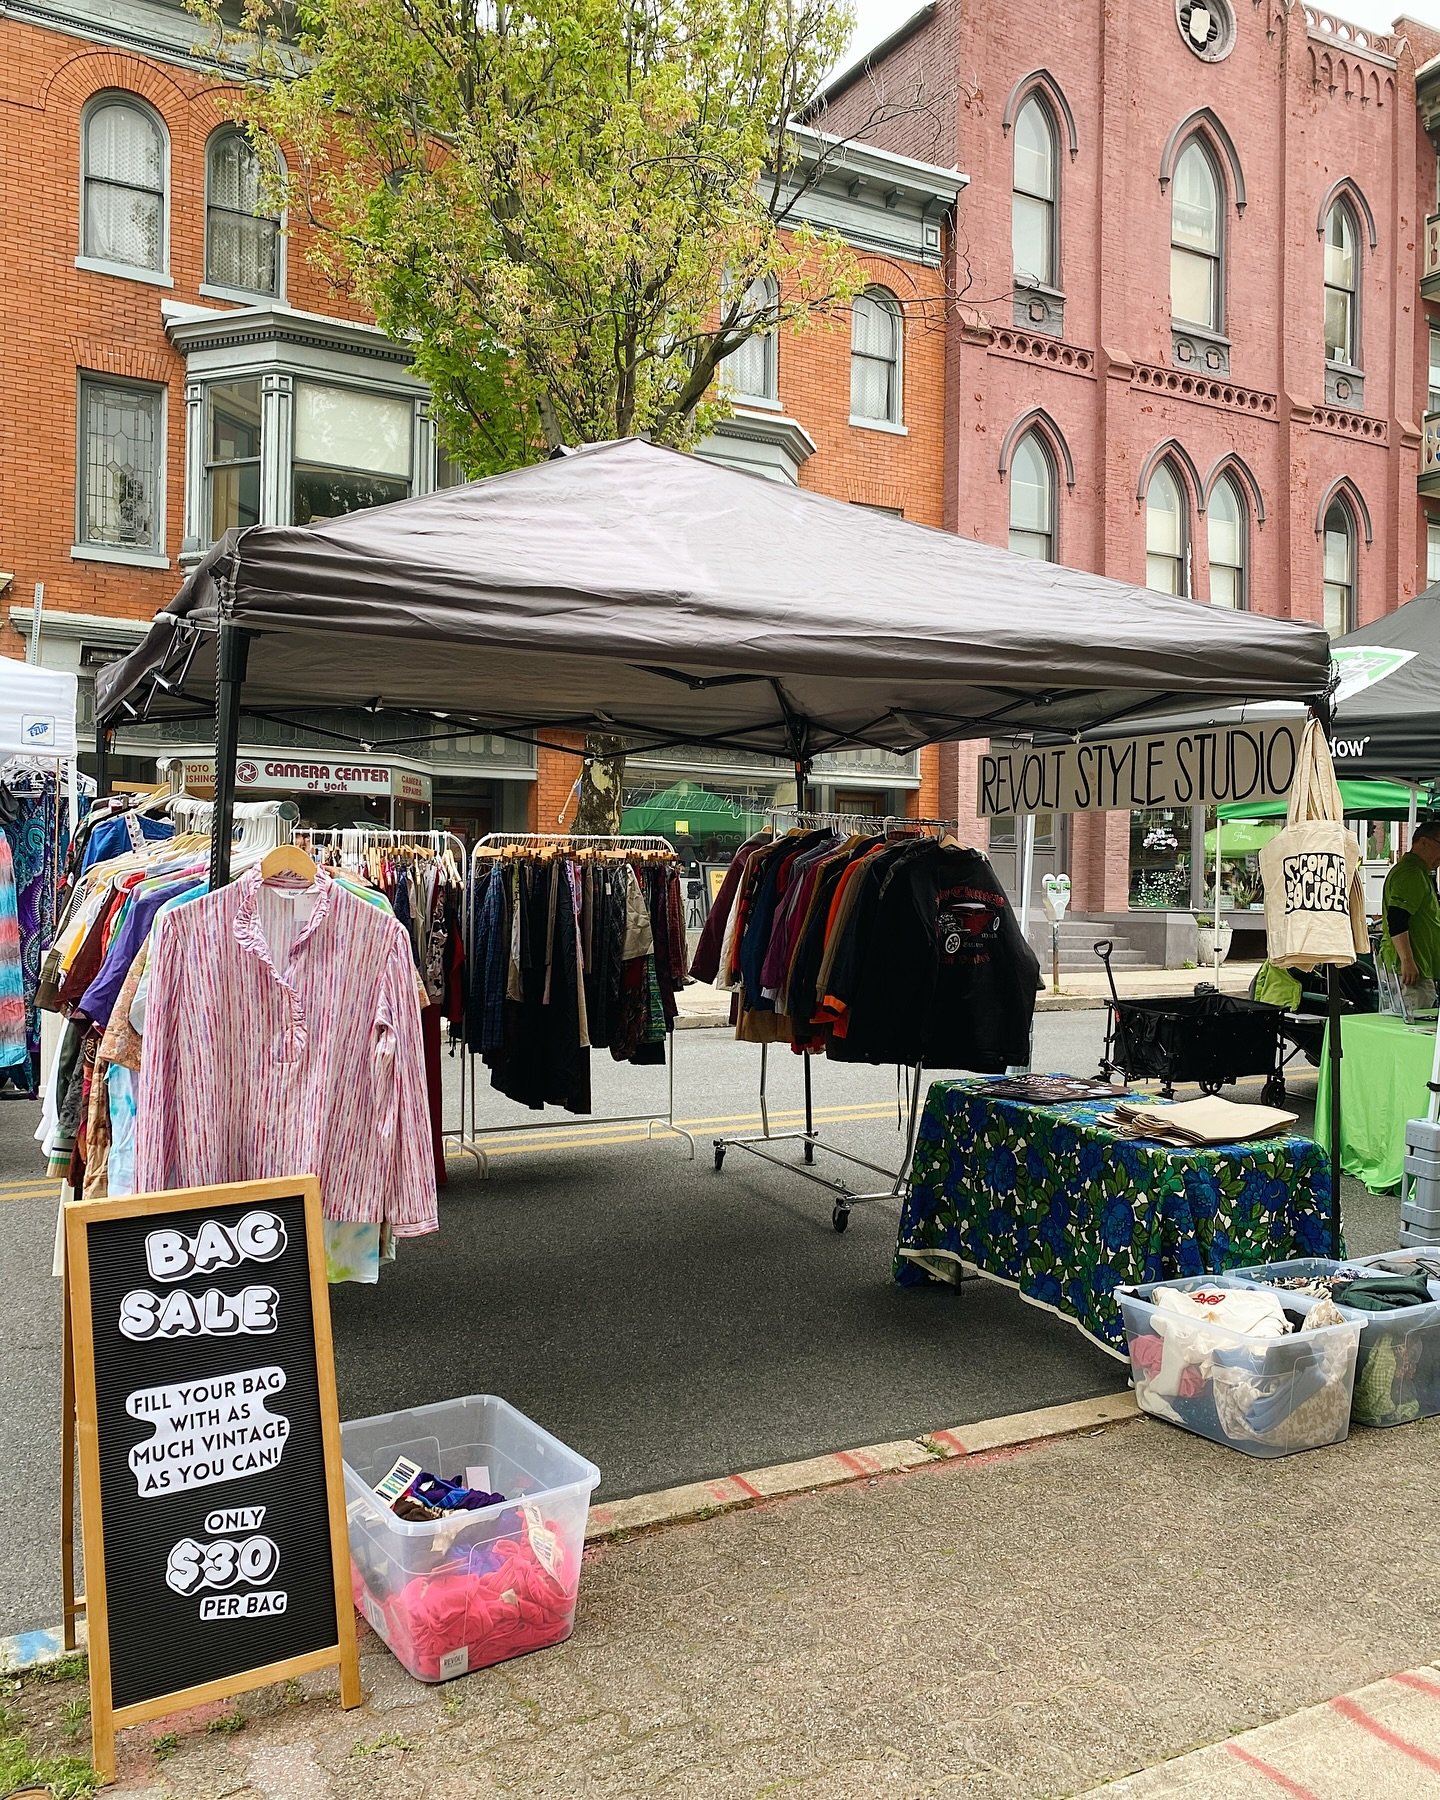 It&rsquo;s BAG SALE time!! Fill a bag for as much vintage as you can for just $30! 🛍️ We&rsquo;re out in front of the shop for Go Green in @downtownyorkpa until 3pm today. 

The shop&rsquo;s also open til 4pm. 👍🏻